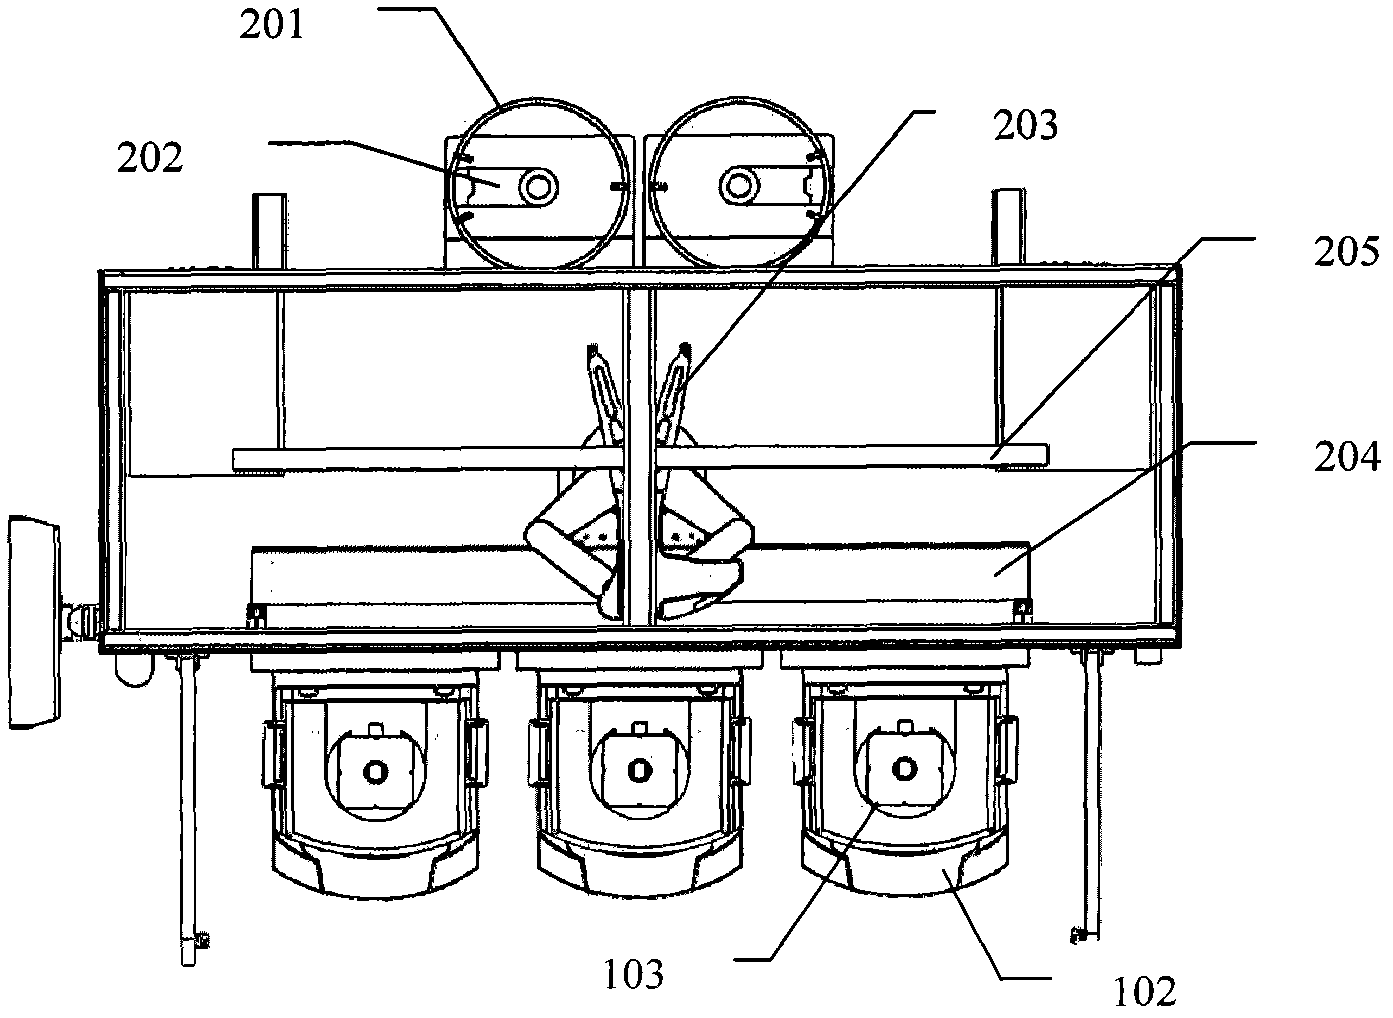 Semiconductor wafer transfer and process pretreatment equipment